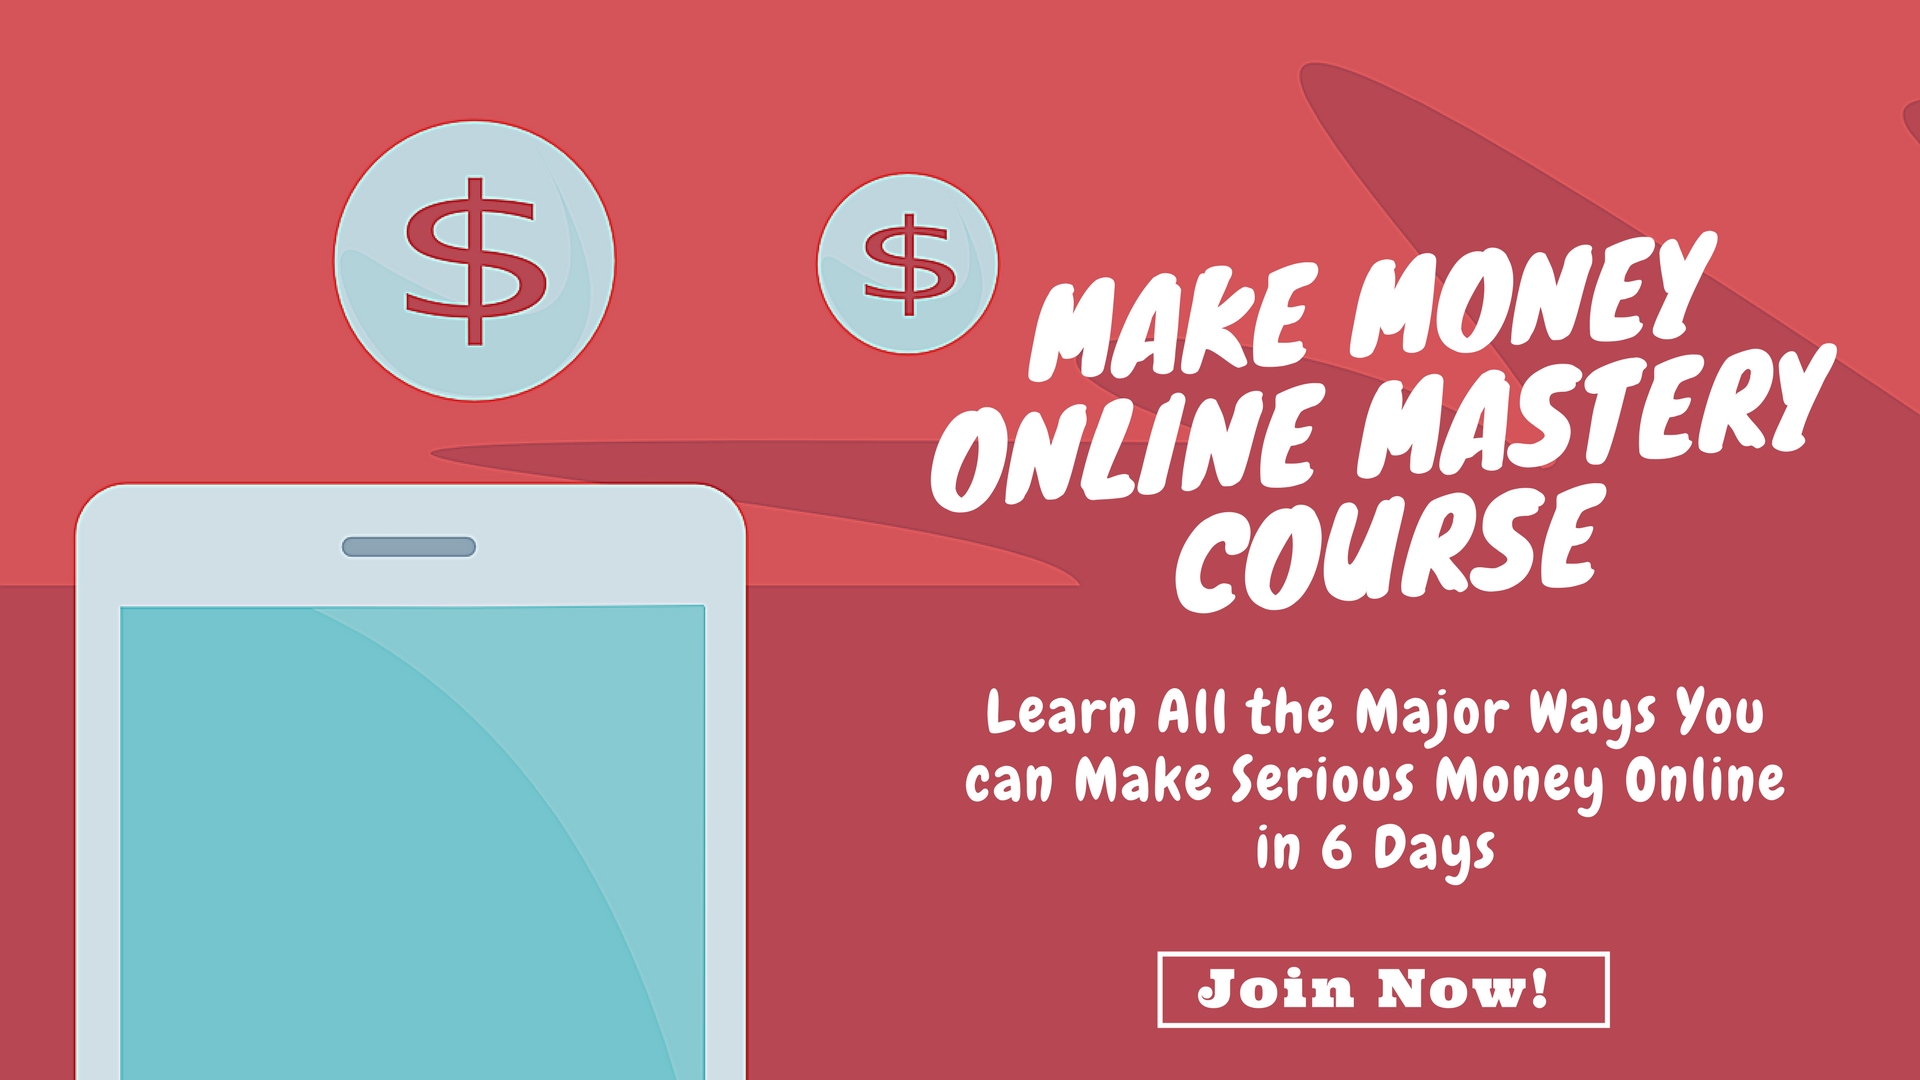 Make Money Online Mastery Course